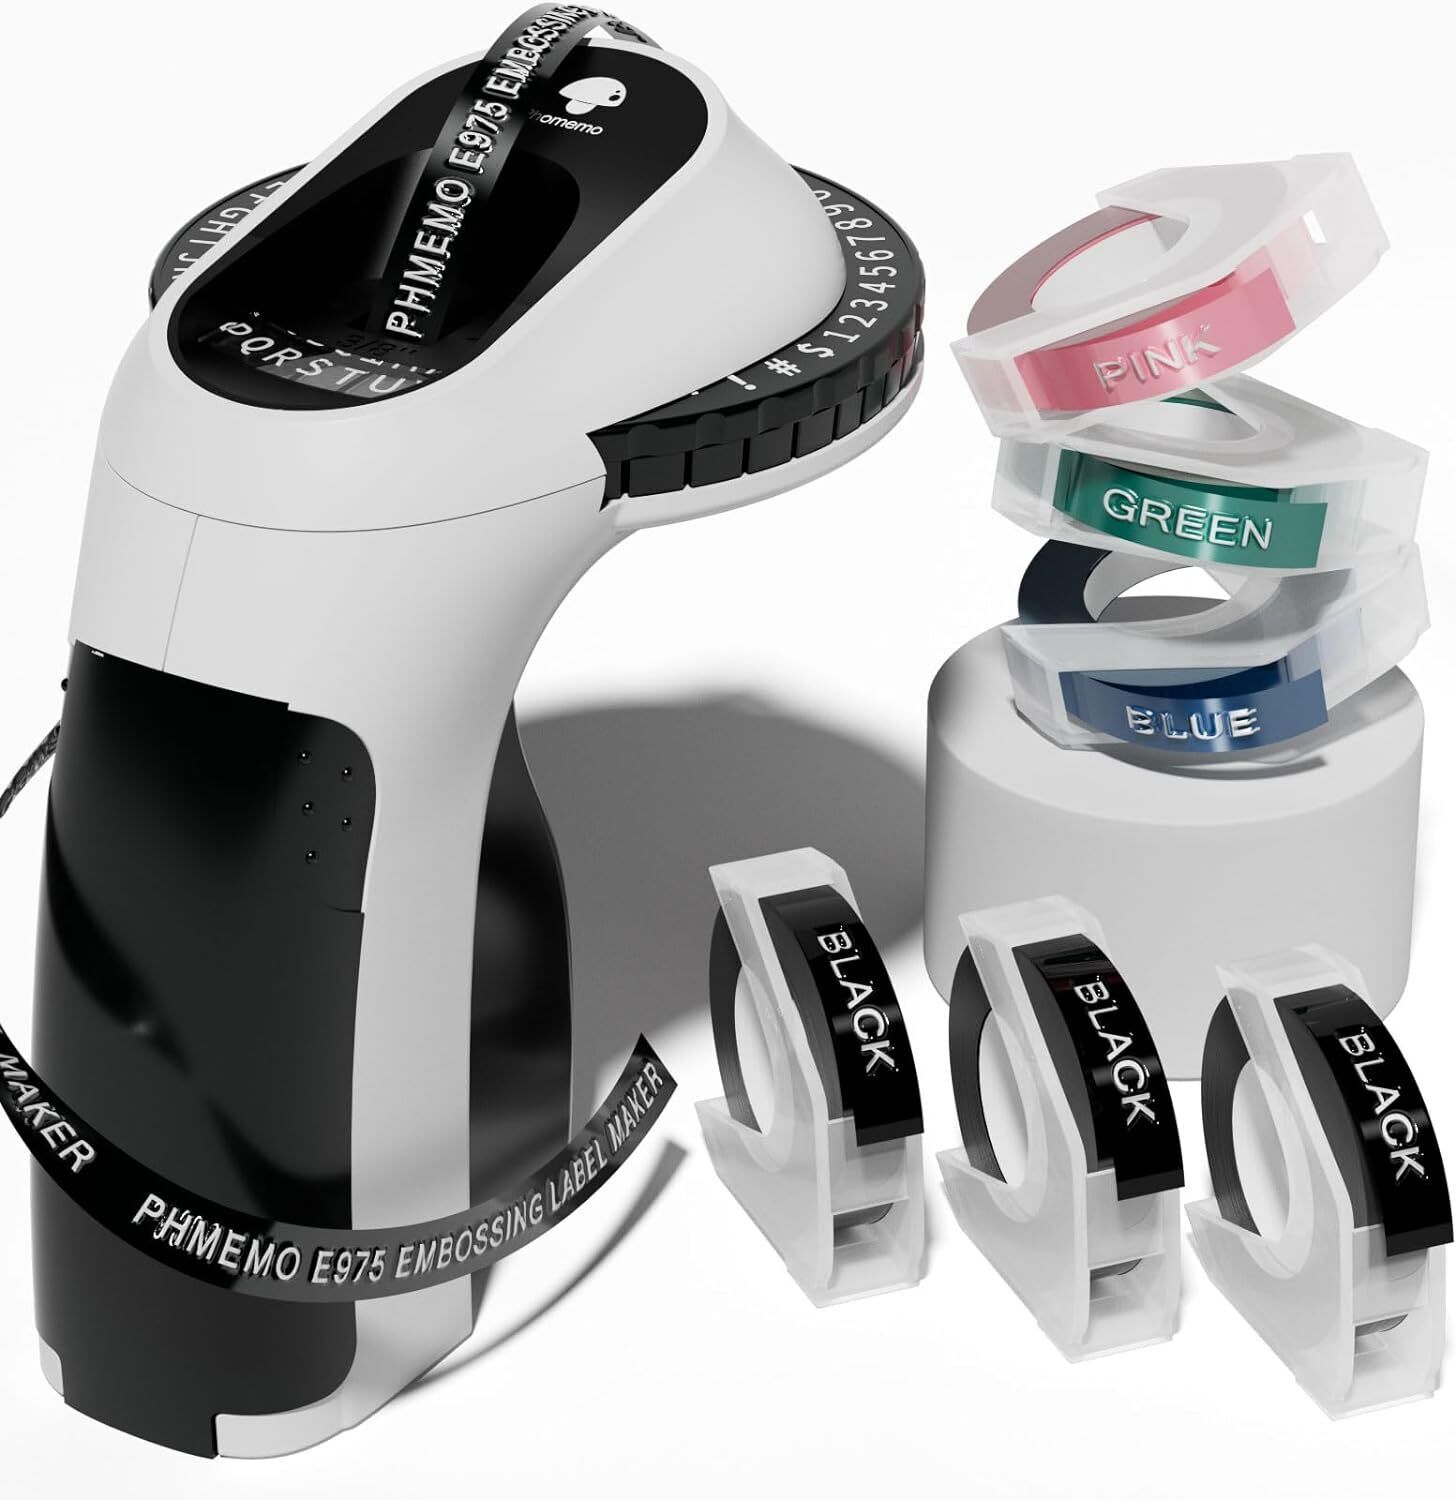 Dymo Embossing Label Maker with 5 Color Label Tapes 3/8